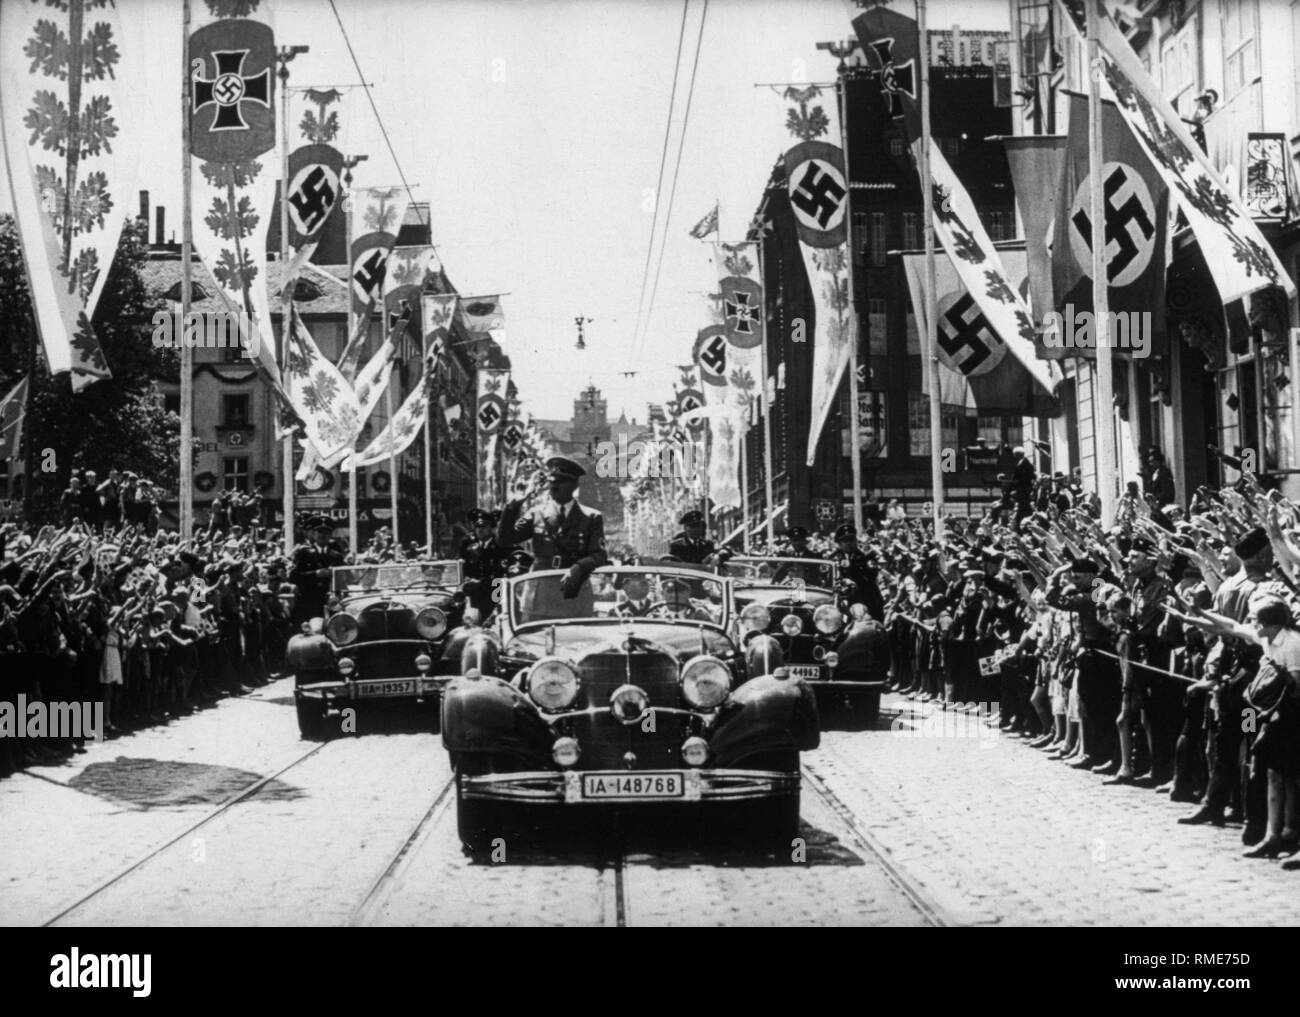 Adolf Hitler in his Mercedes, celebrated by an enthusiastic population. Left and right, street decorated with Nazi flags, including the flag of the National Socialist War Victim's Care next to a swastika flag. Stock Photo